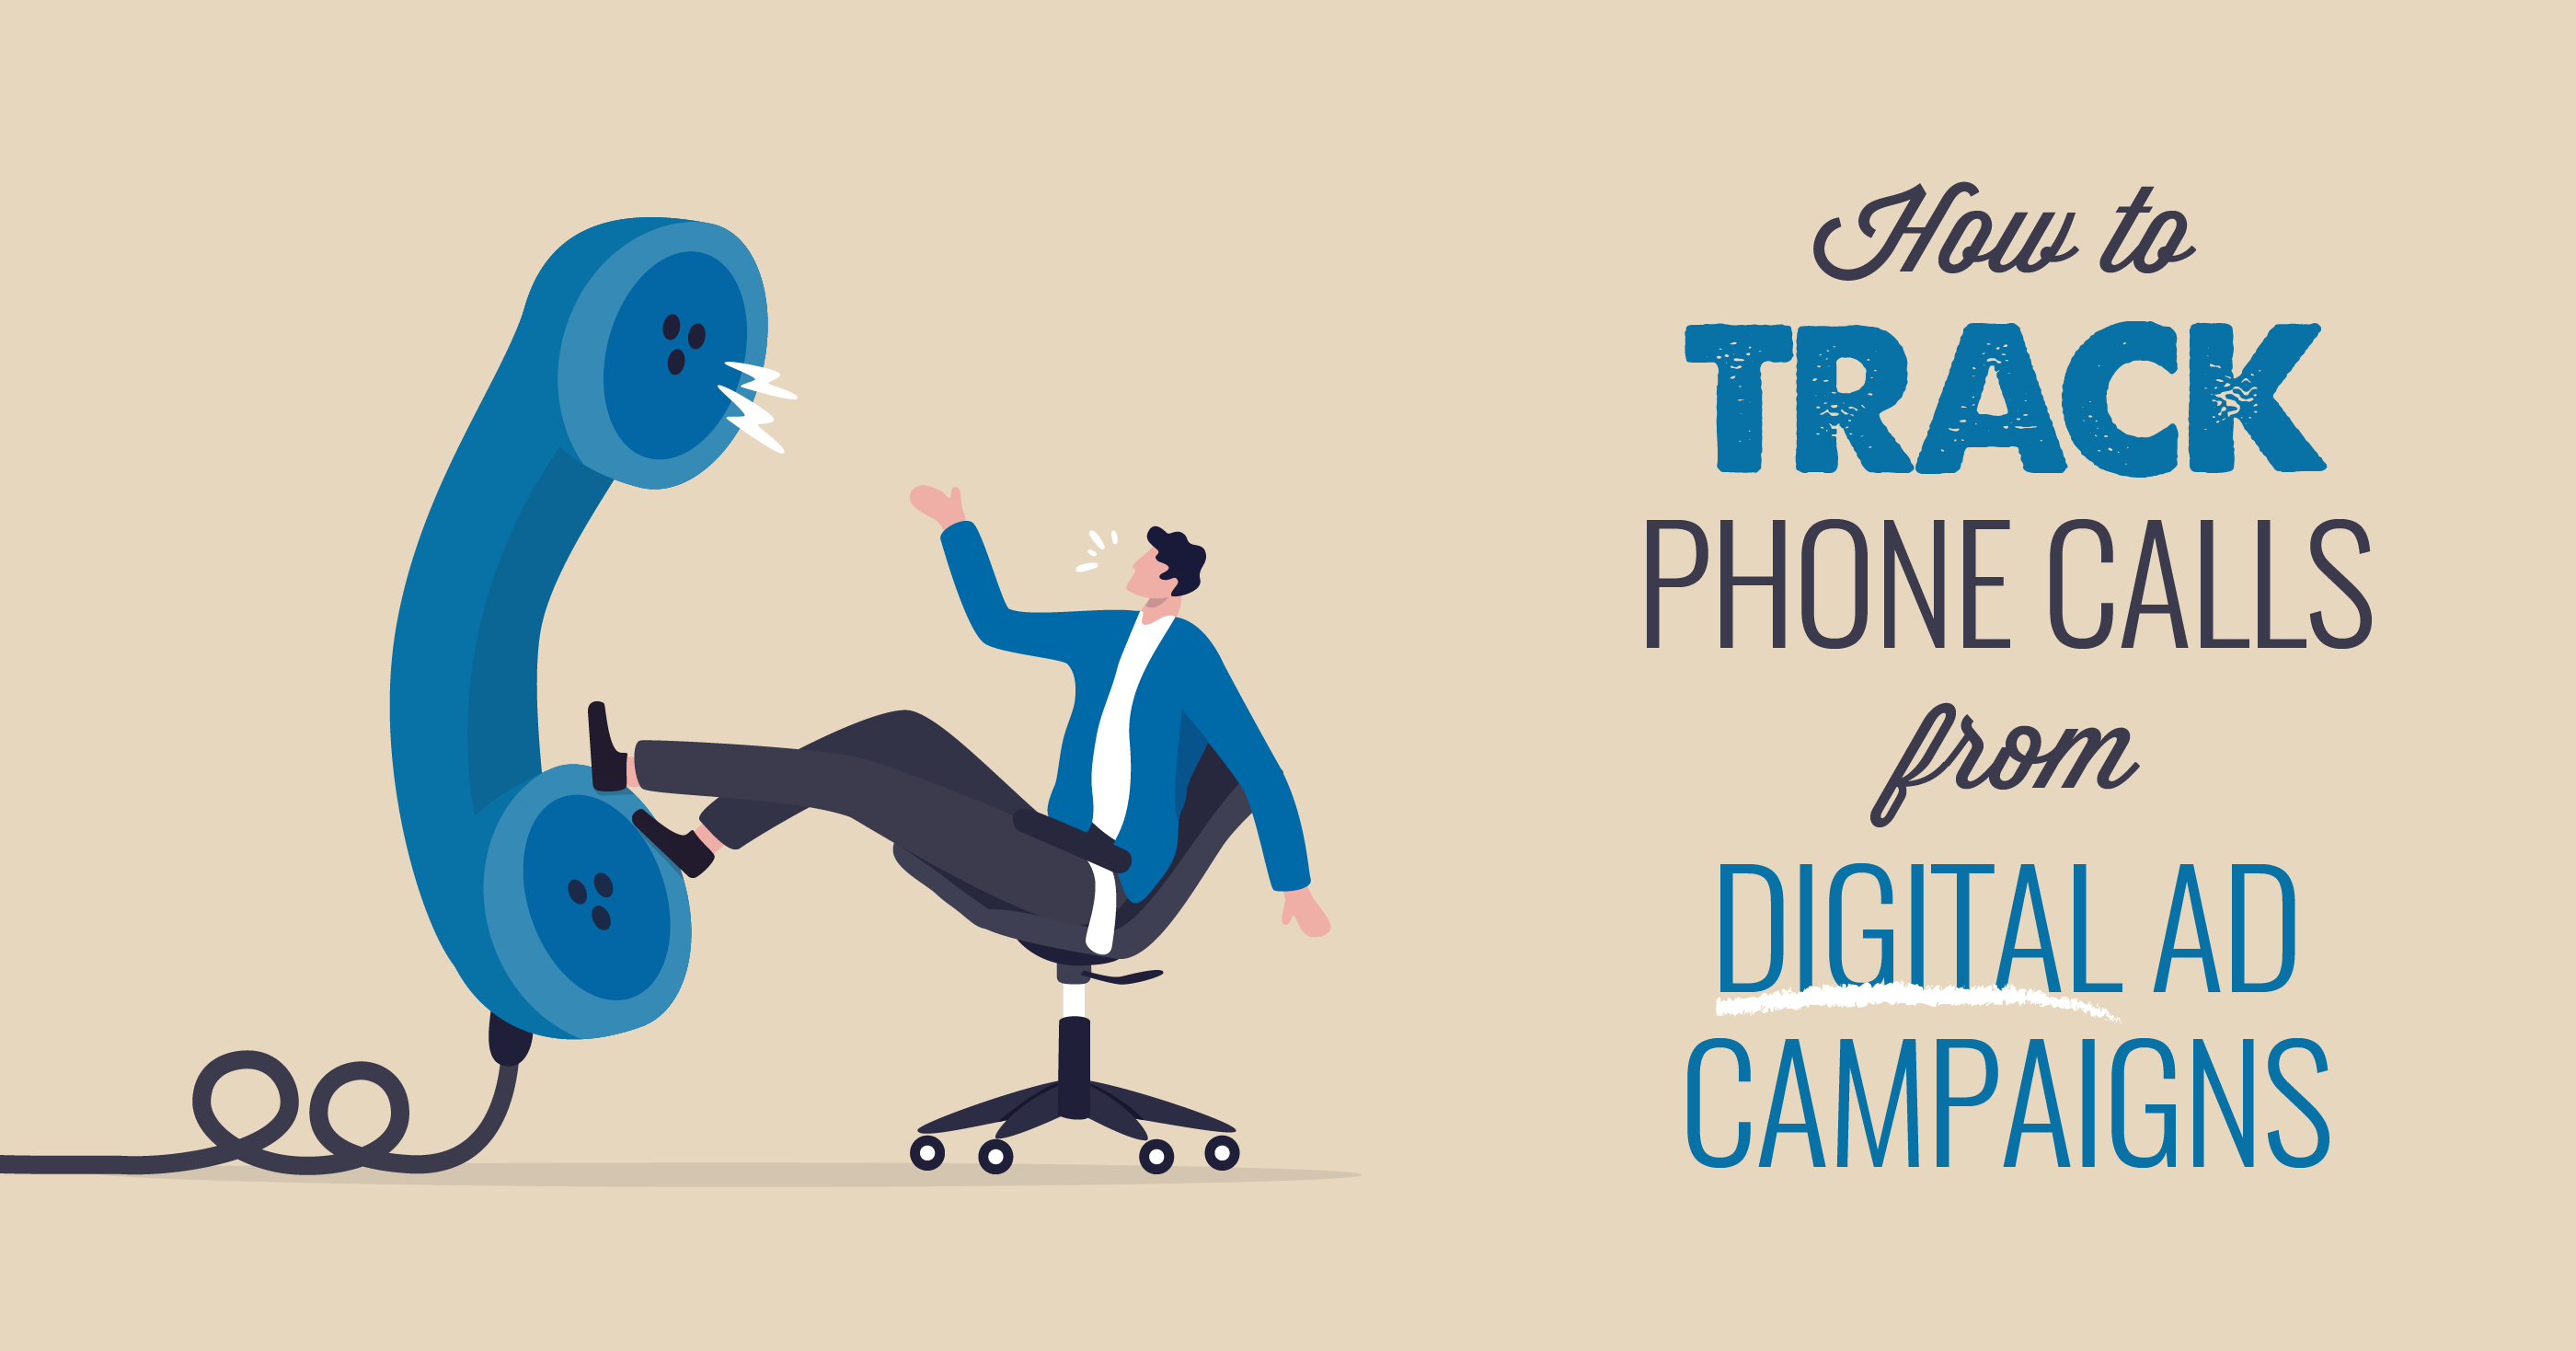 How to track phone calls from digital ad campaigns